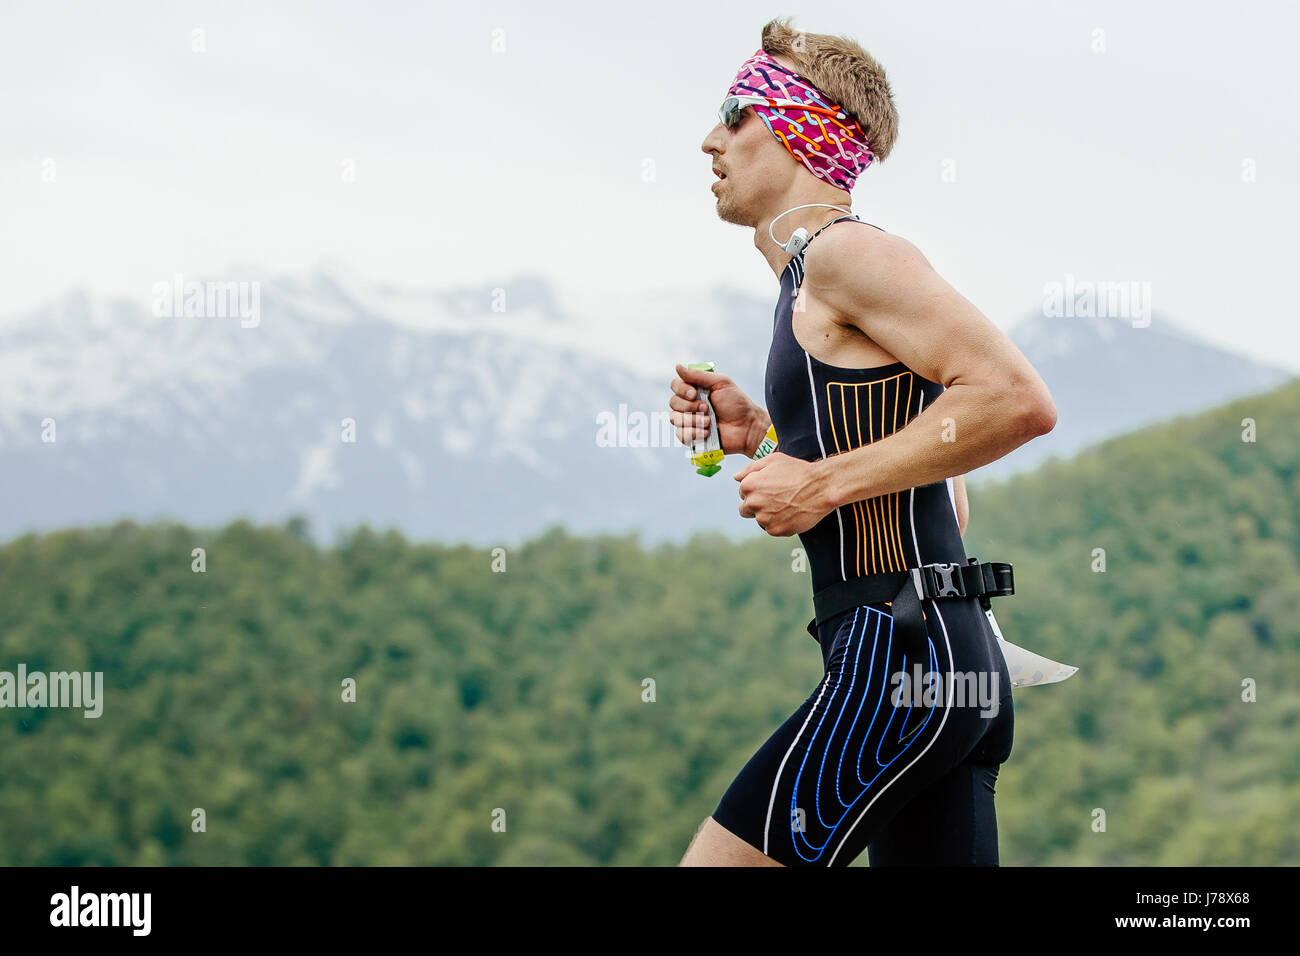 young man runner with energy nutrient gel in hand running in race Spring mountain marathon Stock Photo